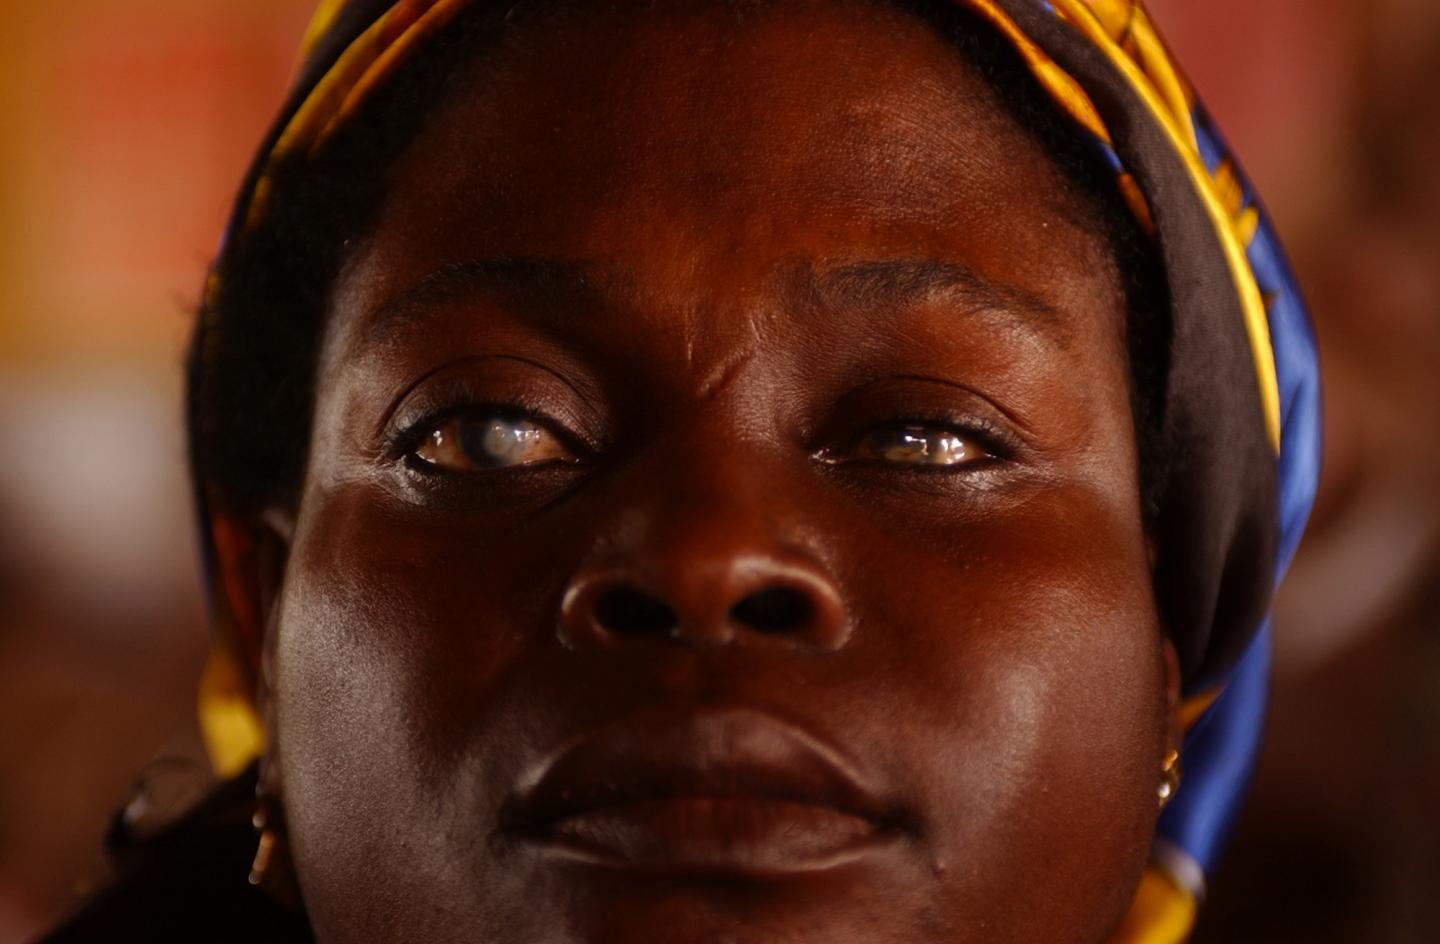 Woman with Cataracts in Ghana